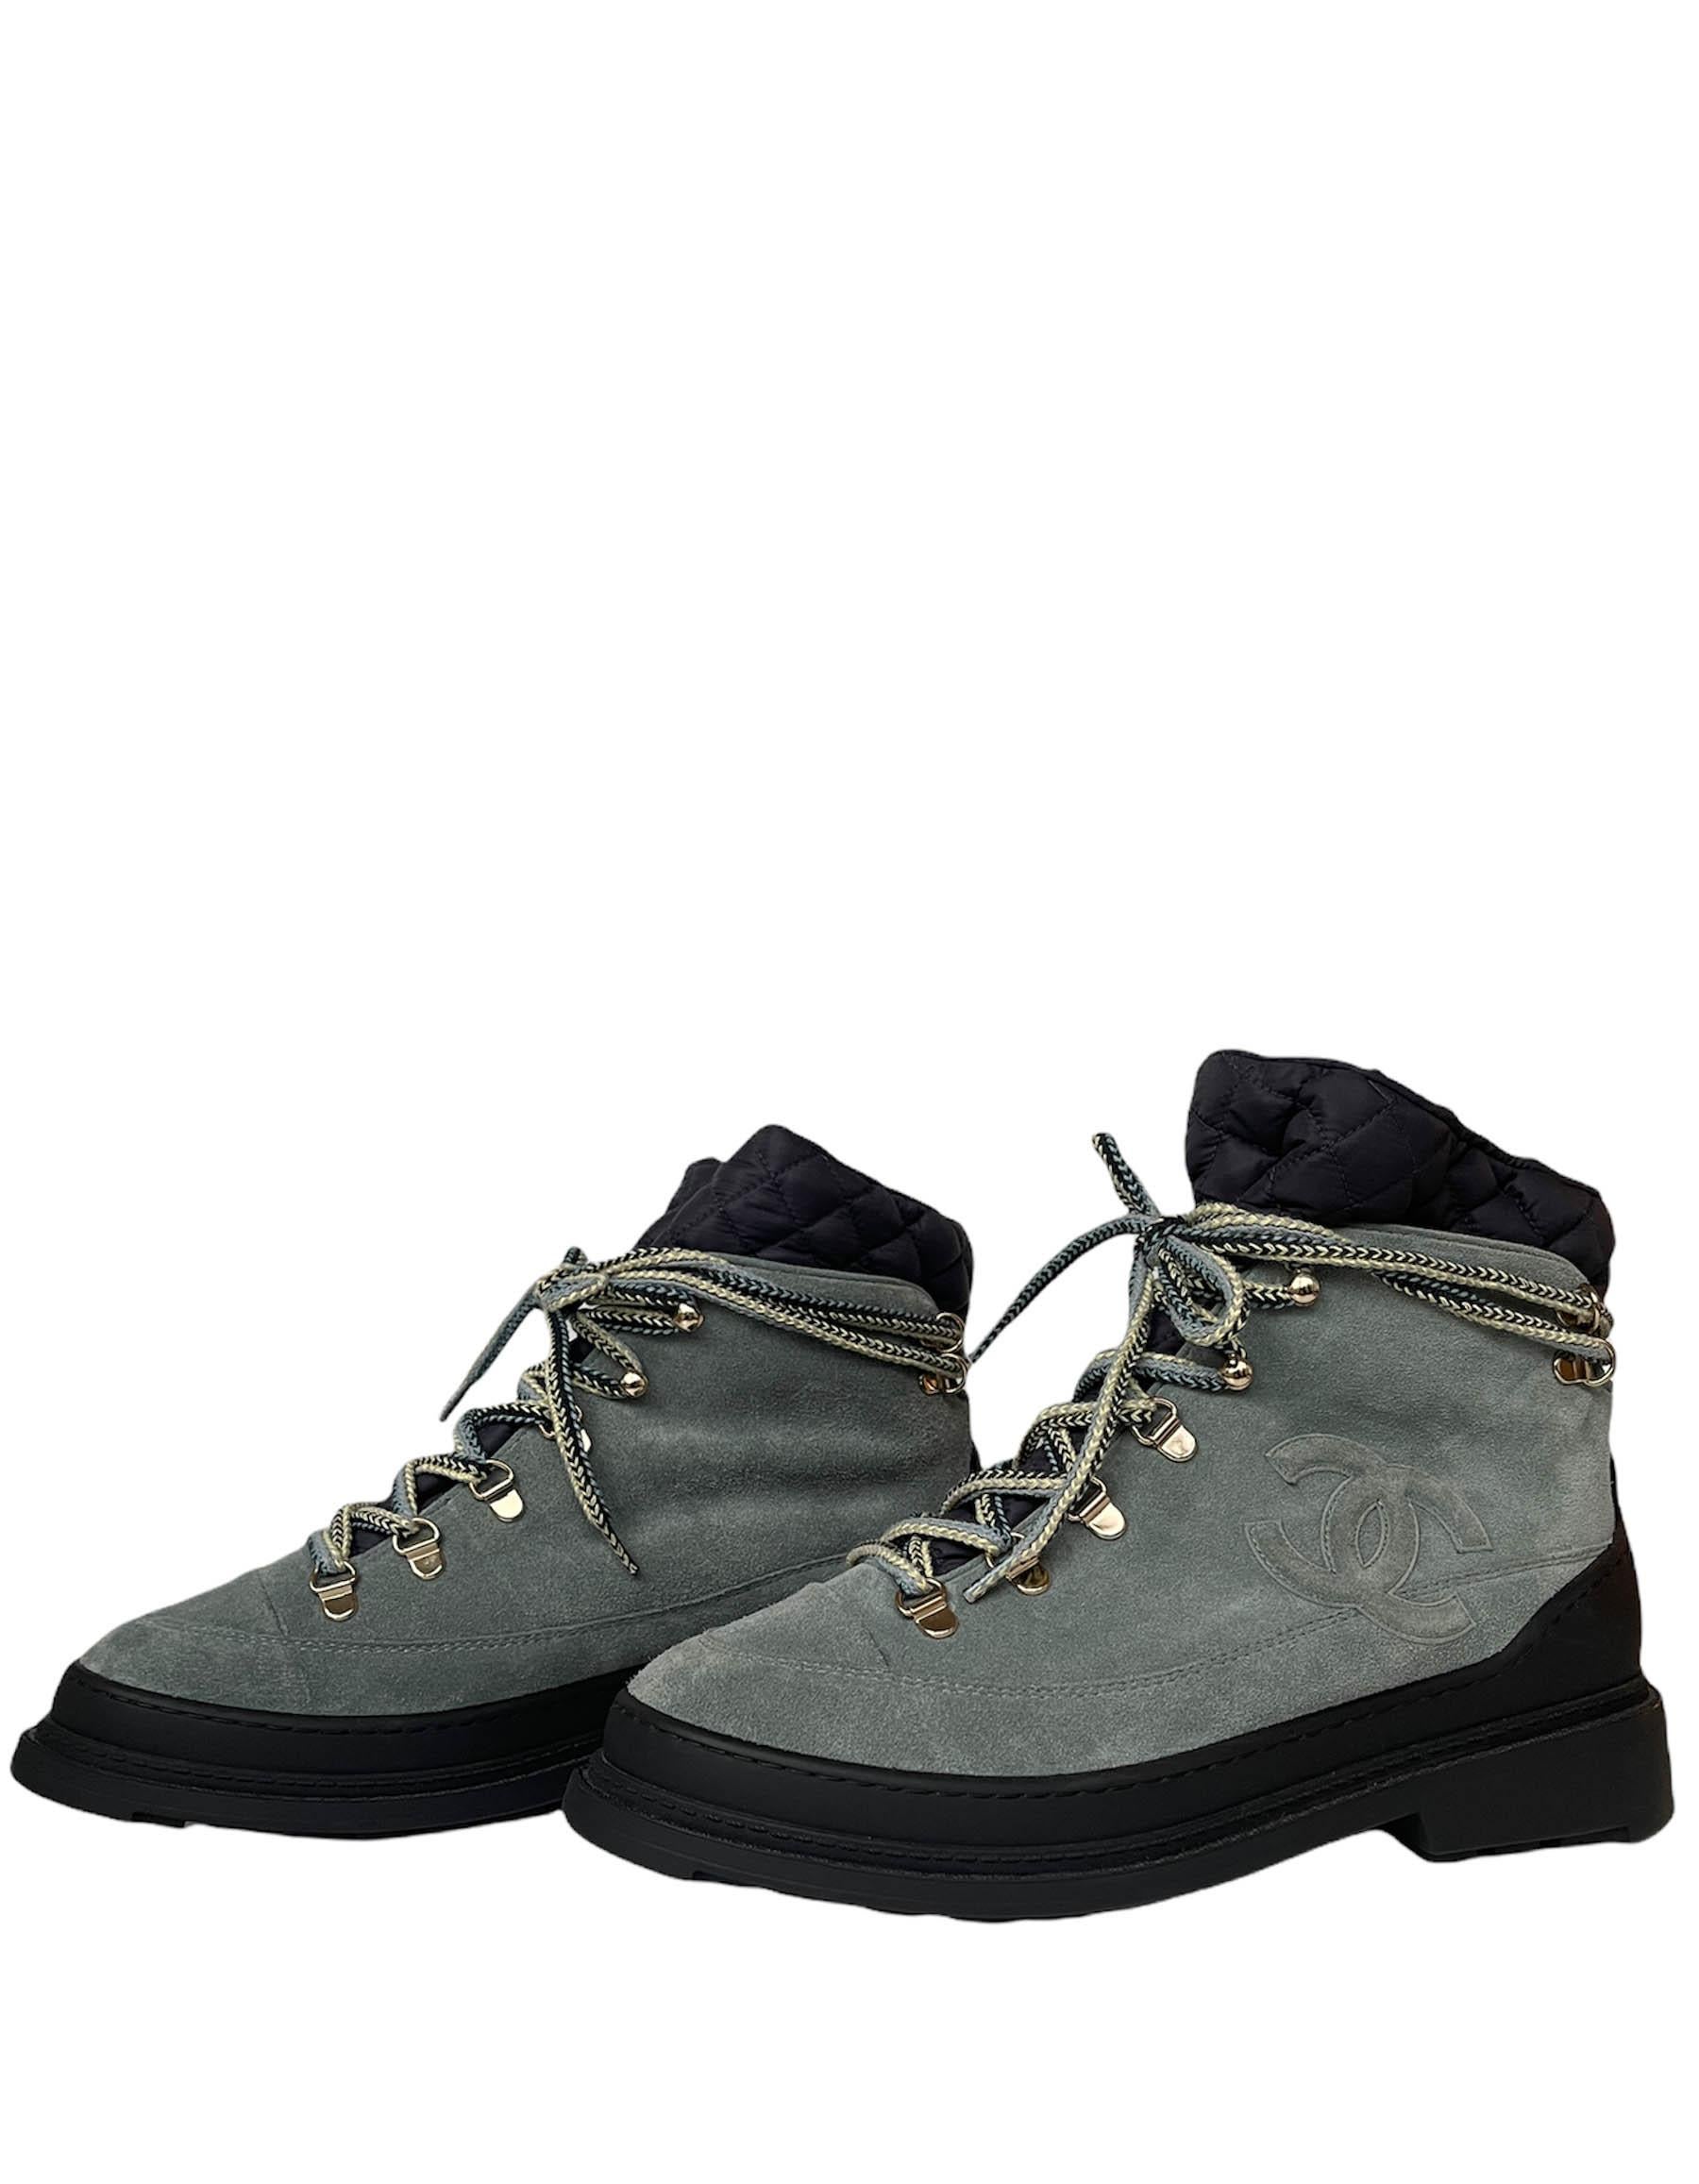 Chanel NEW Slate Blue Suede Logo High Top Lace Up Boots.  Features navy nylon quilted insert and shearling lining.  Soles feature optional snow grips that can be tucked away into the sole with the included tool.

Made In: Italy
Color: Bluish grey,